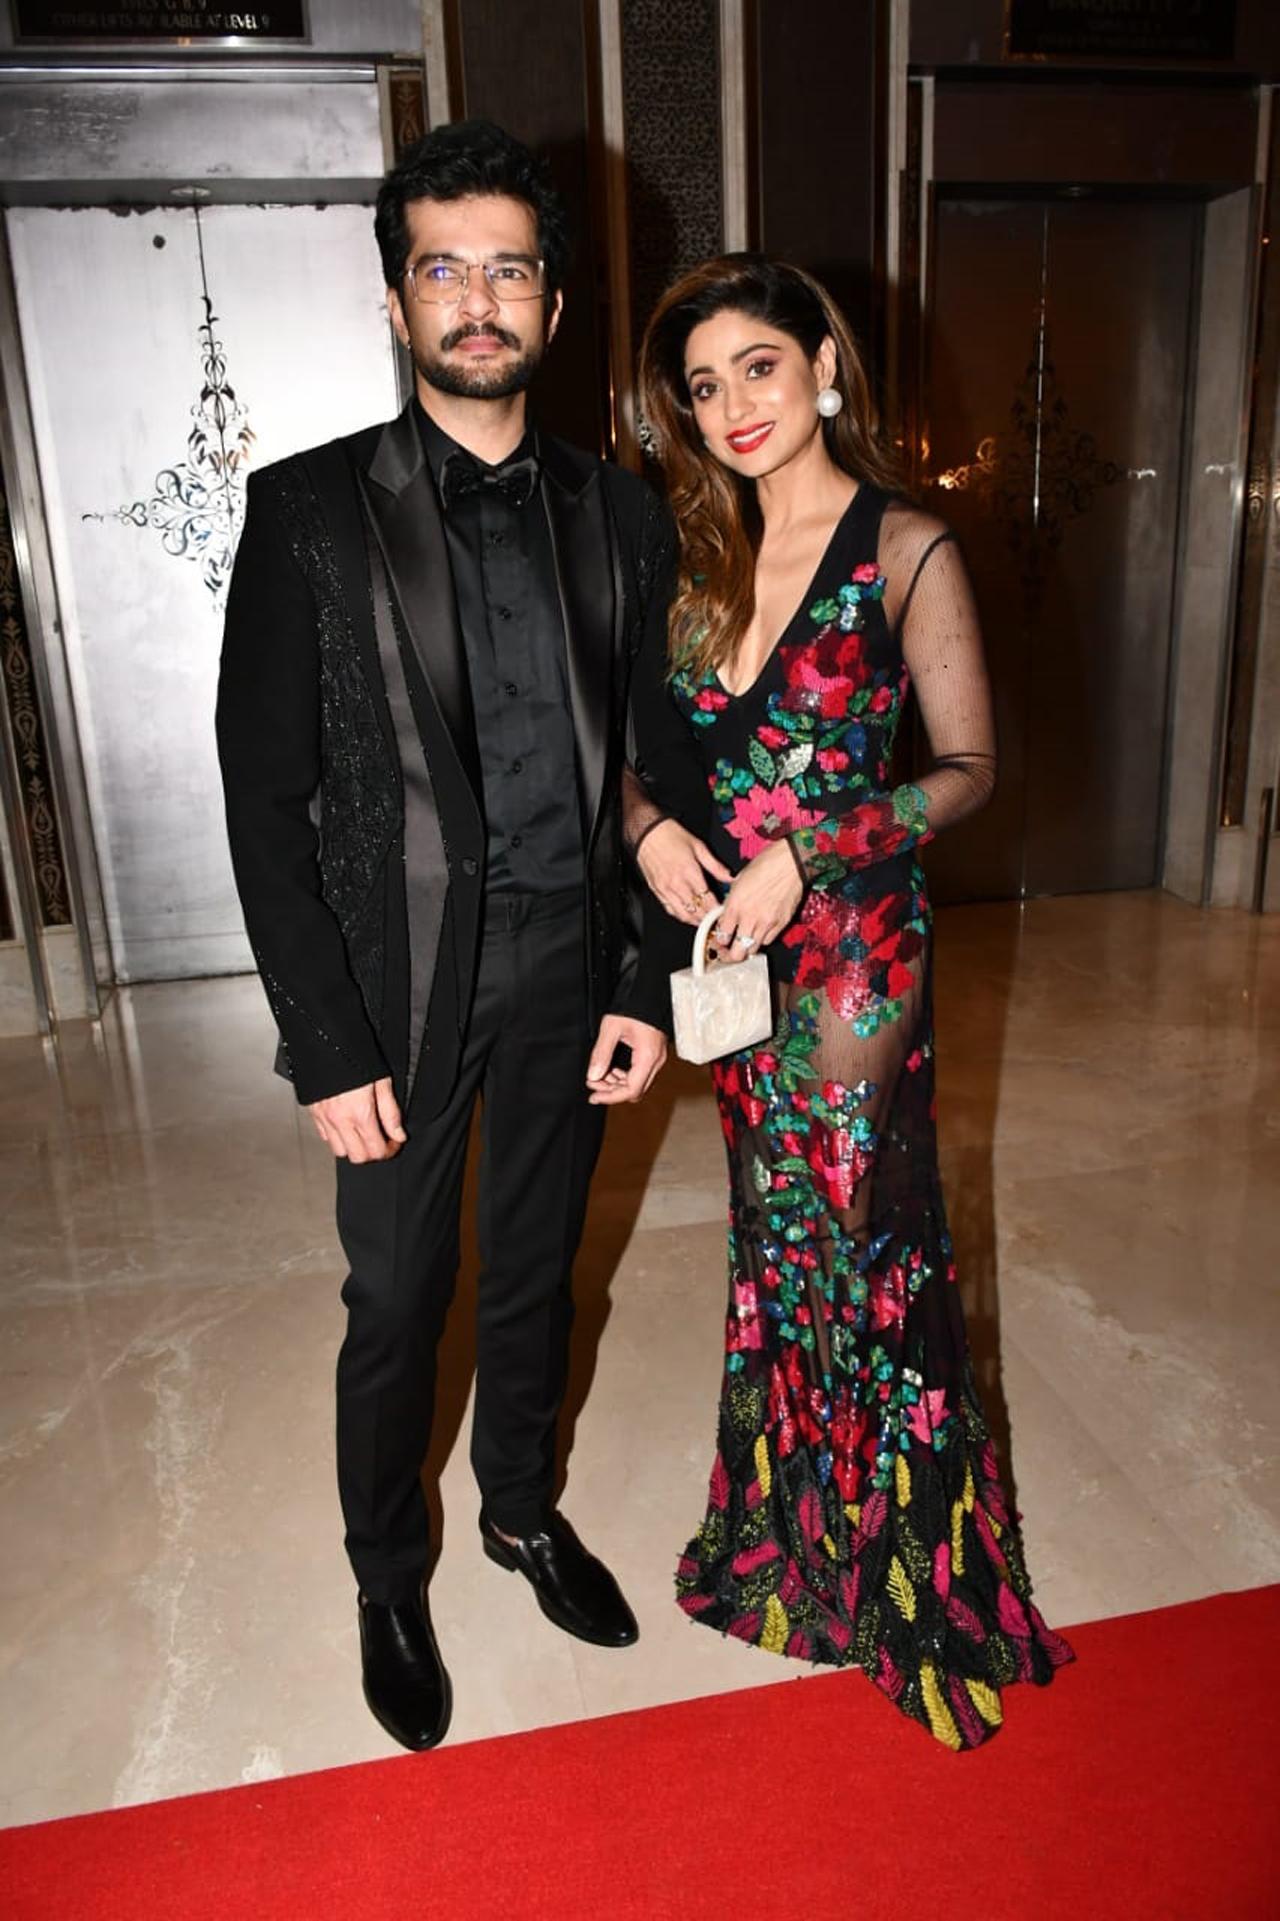 Shamita Shetty and Raqesh Bapat squashed the separation rumours by walking the red carpet event together at their classy best!